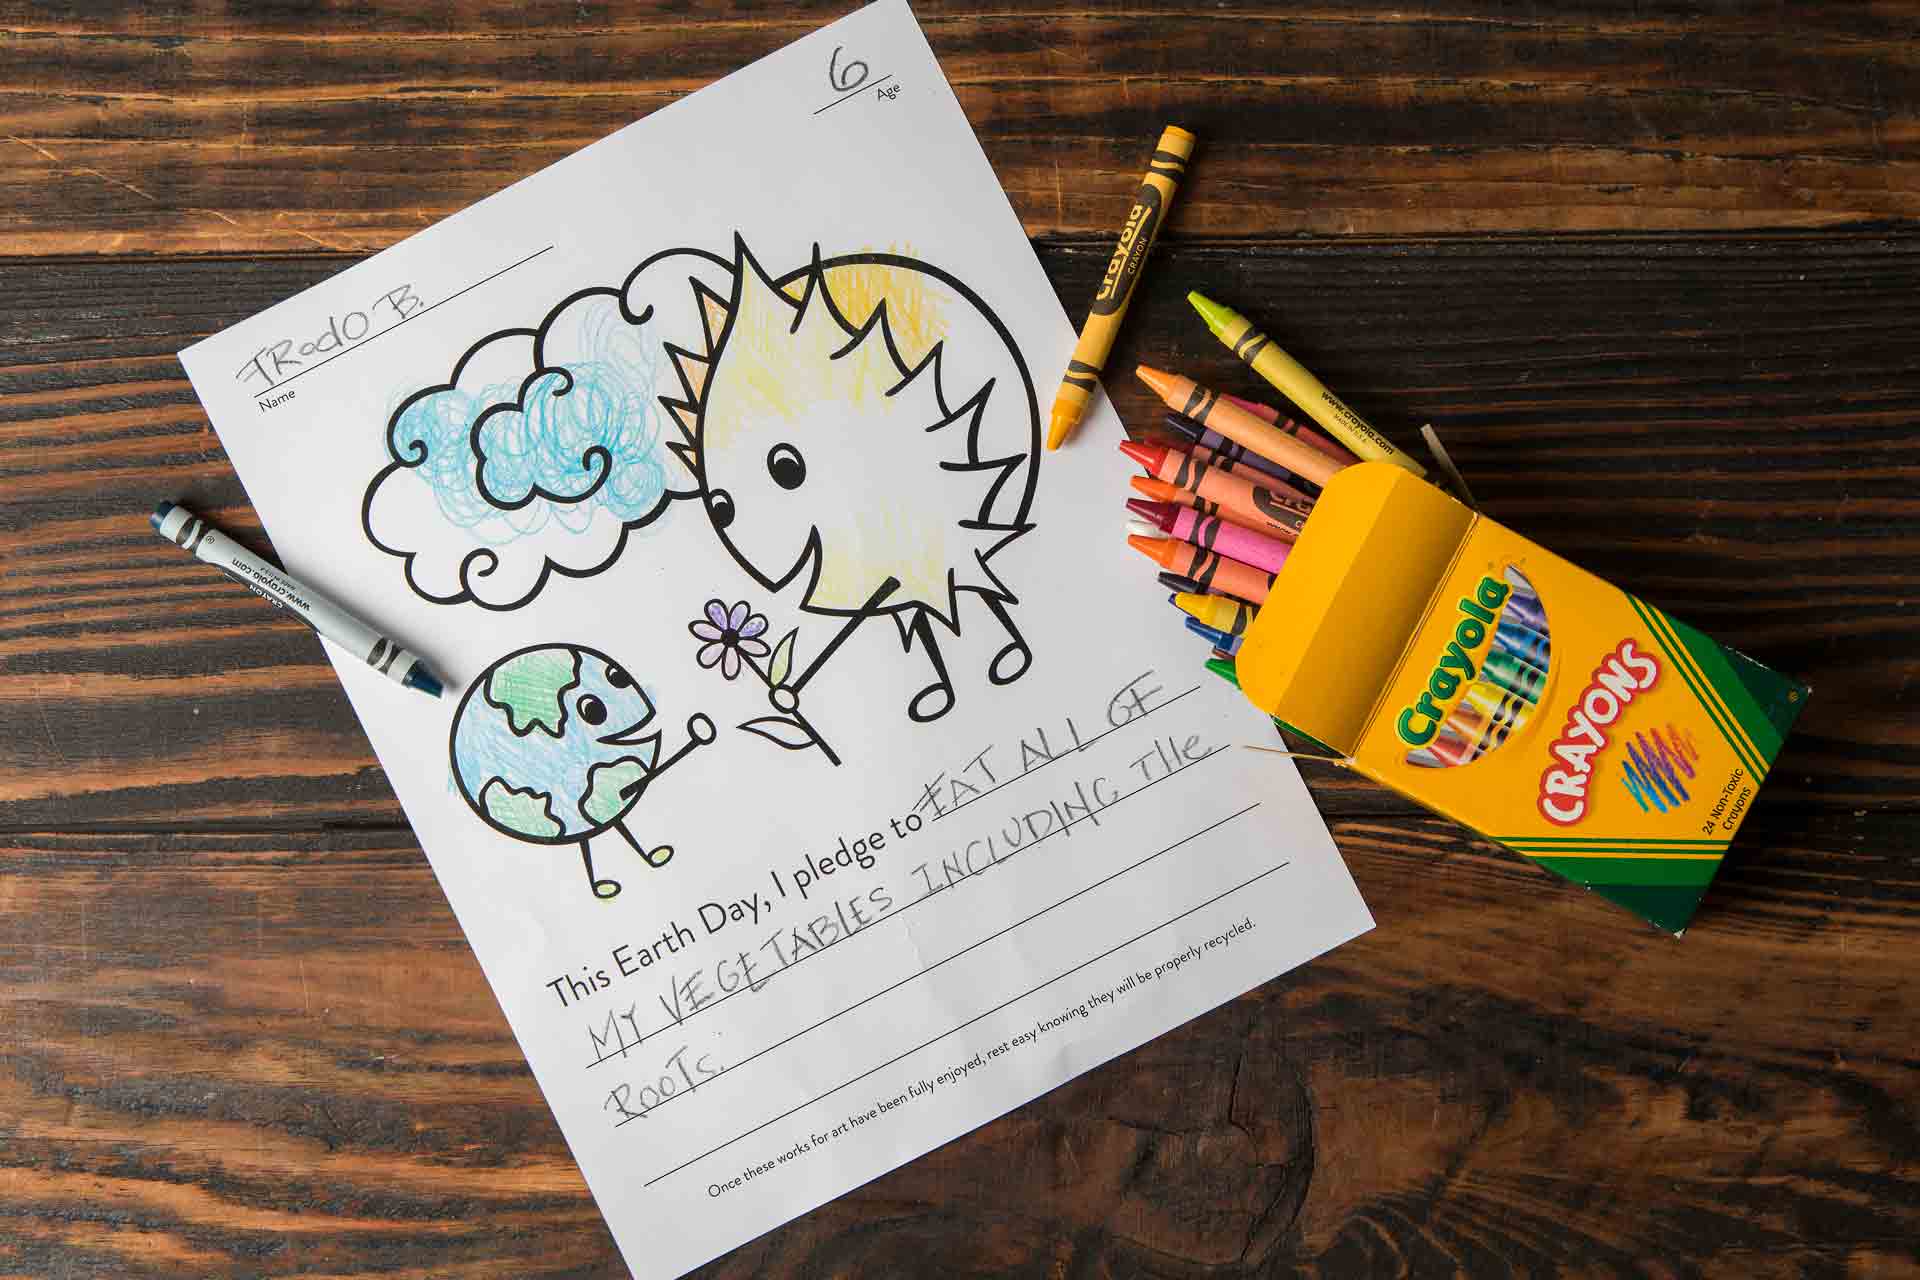 Earth Day Green Pledge Coloring Contest Page with Crayons 